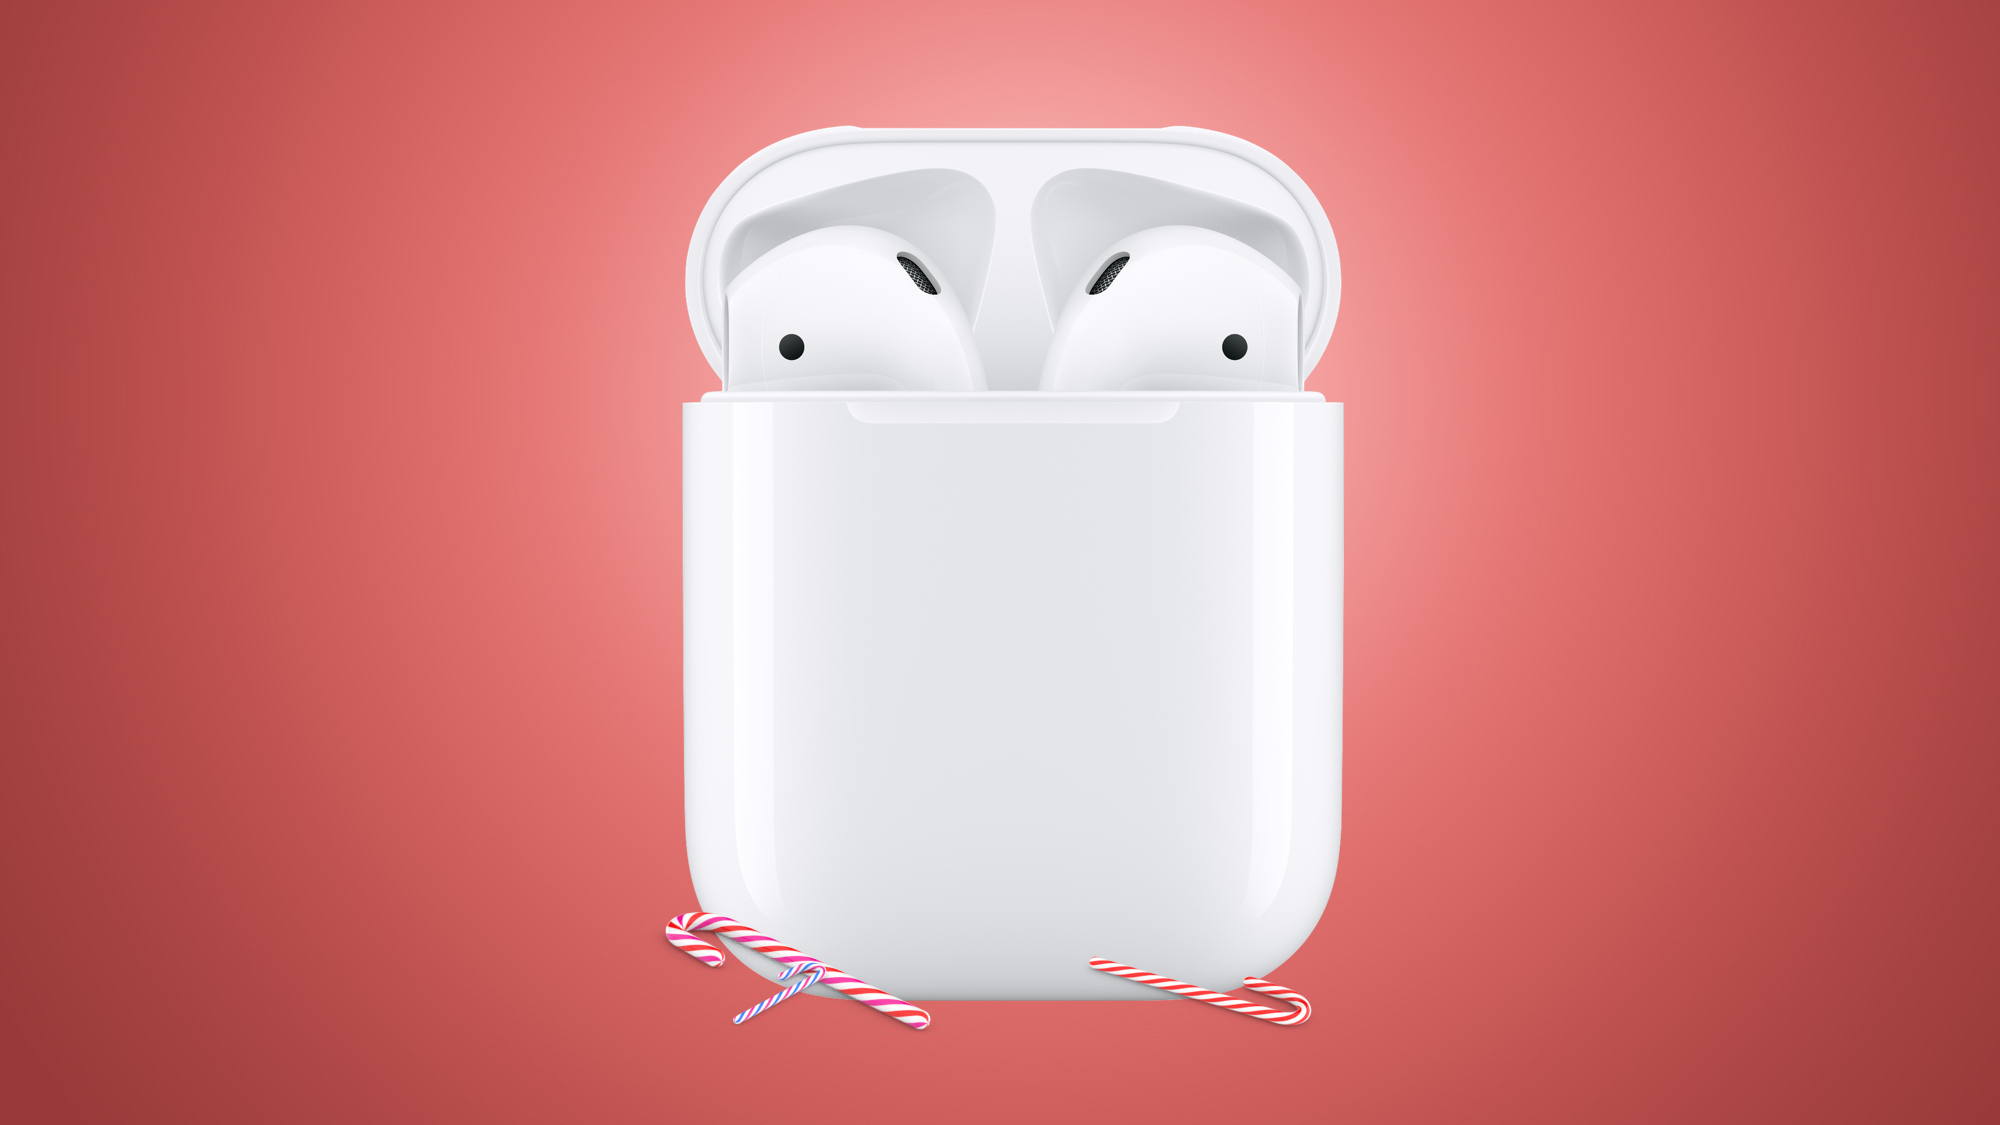 AirPods Black Friday Deals Continue With Best-Ever Price on AirPods 2 at $79